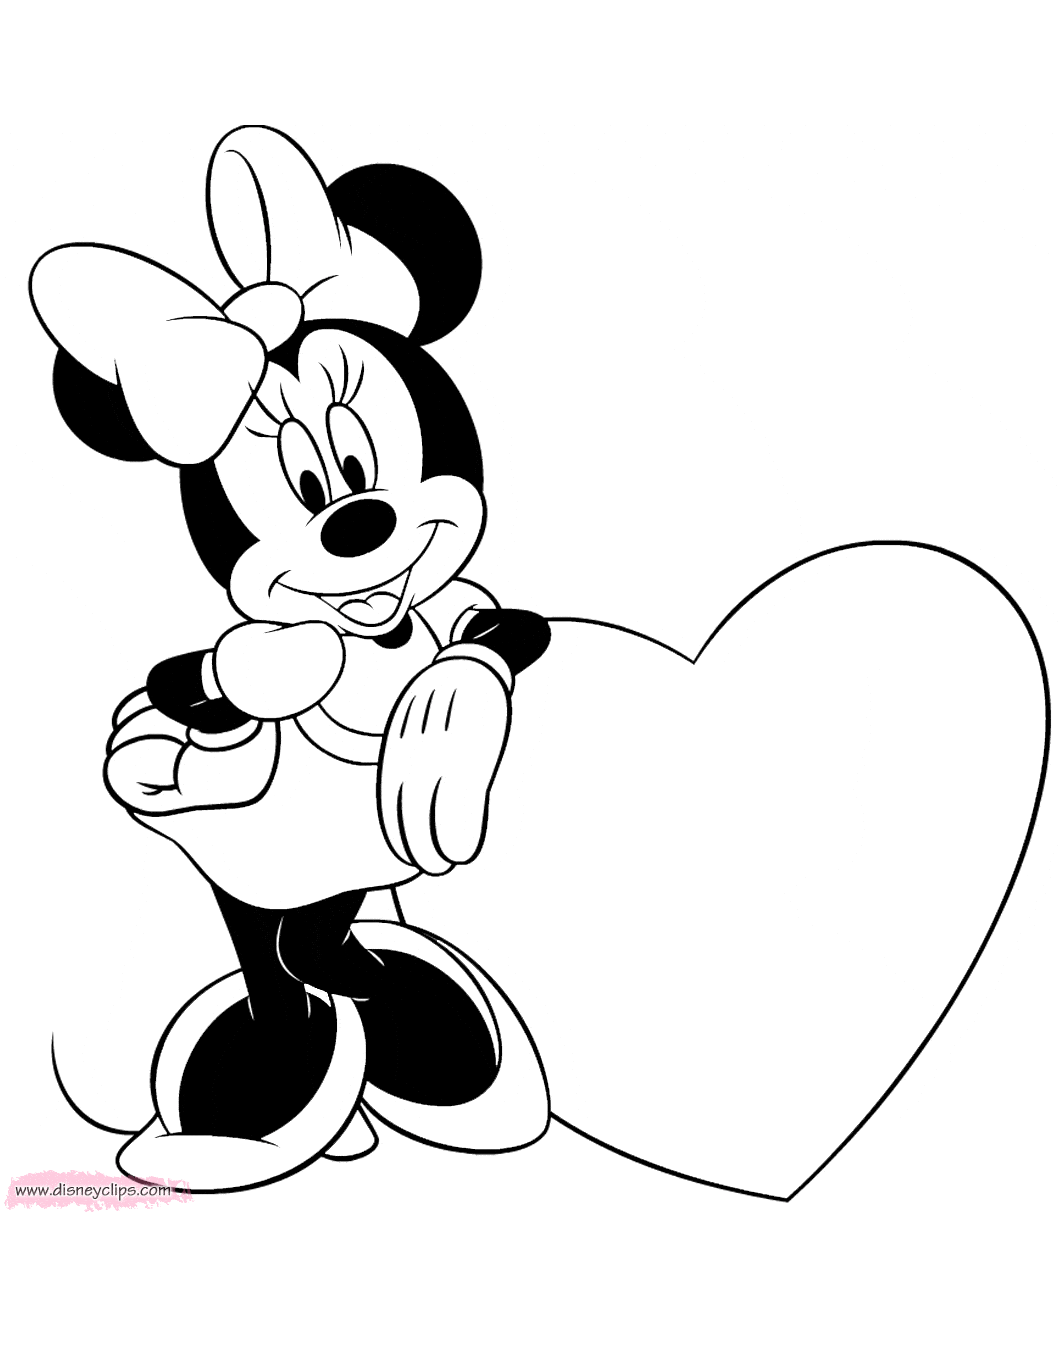 coloring page Minnie leaning on giant heart